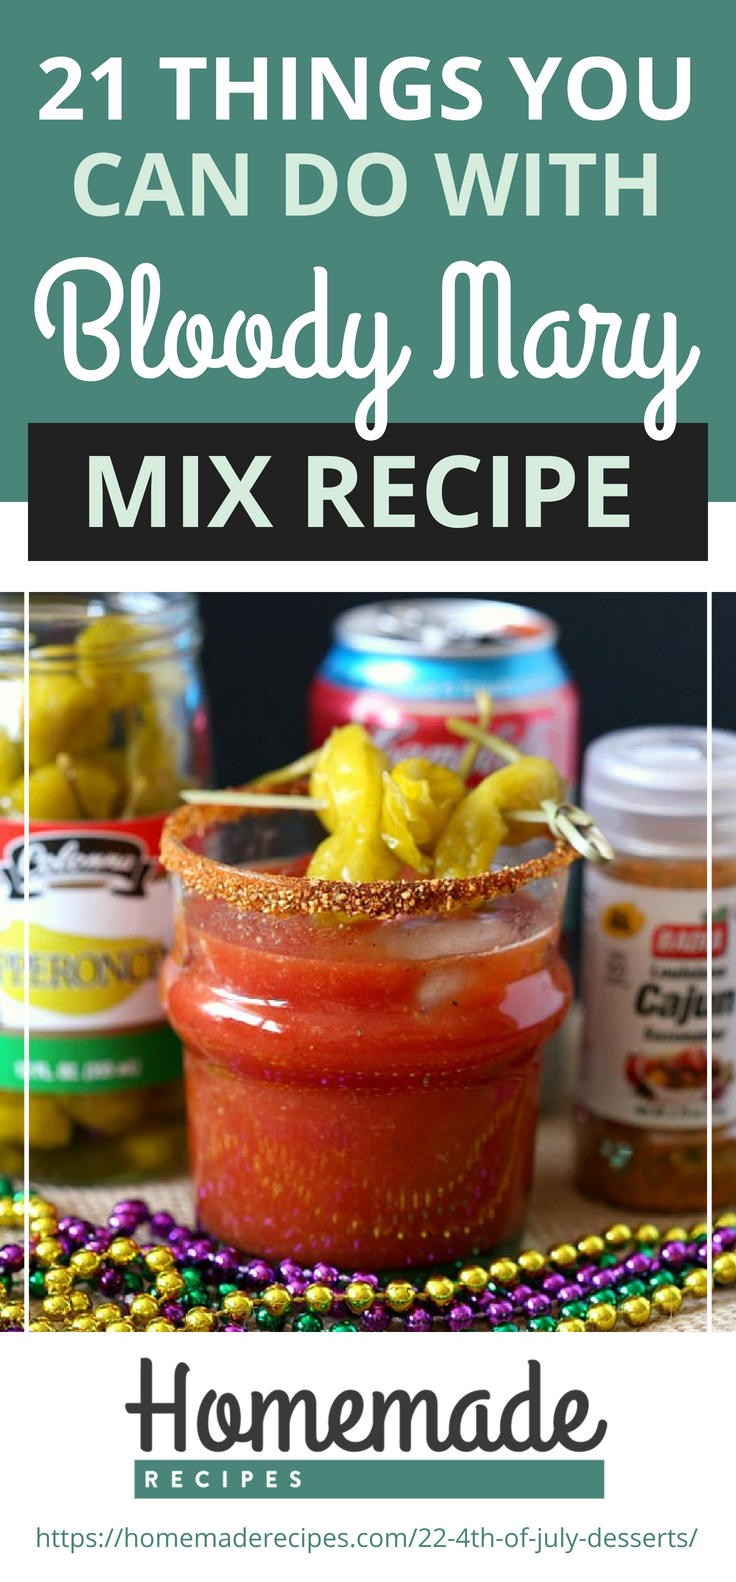 Pinterest Placard | 21 Things You Can Do With Bloody Mary Mix Recipe